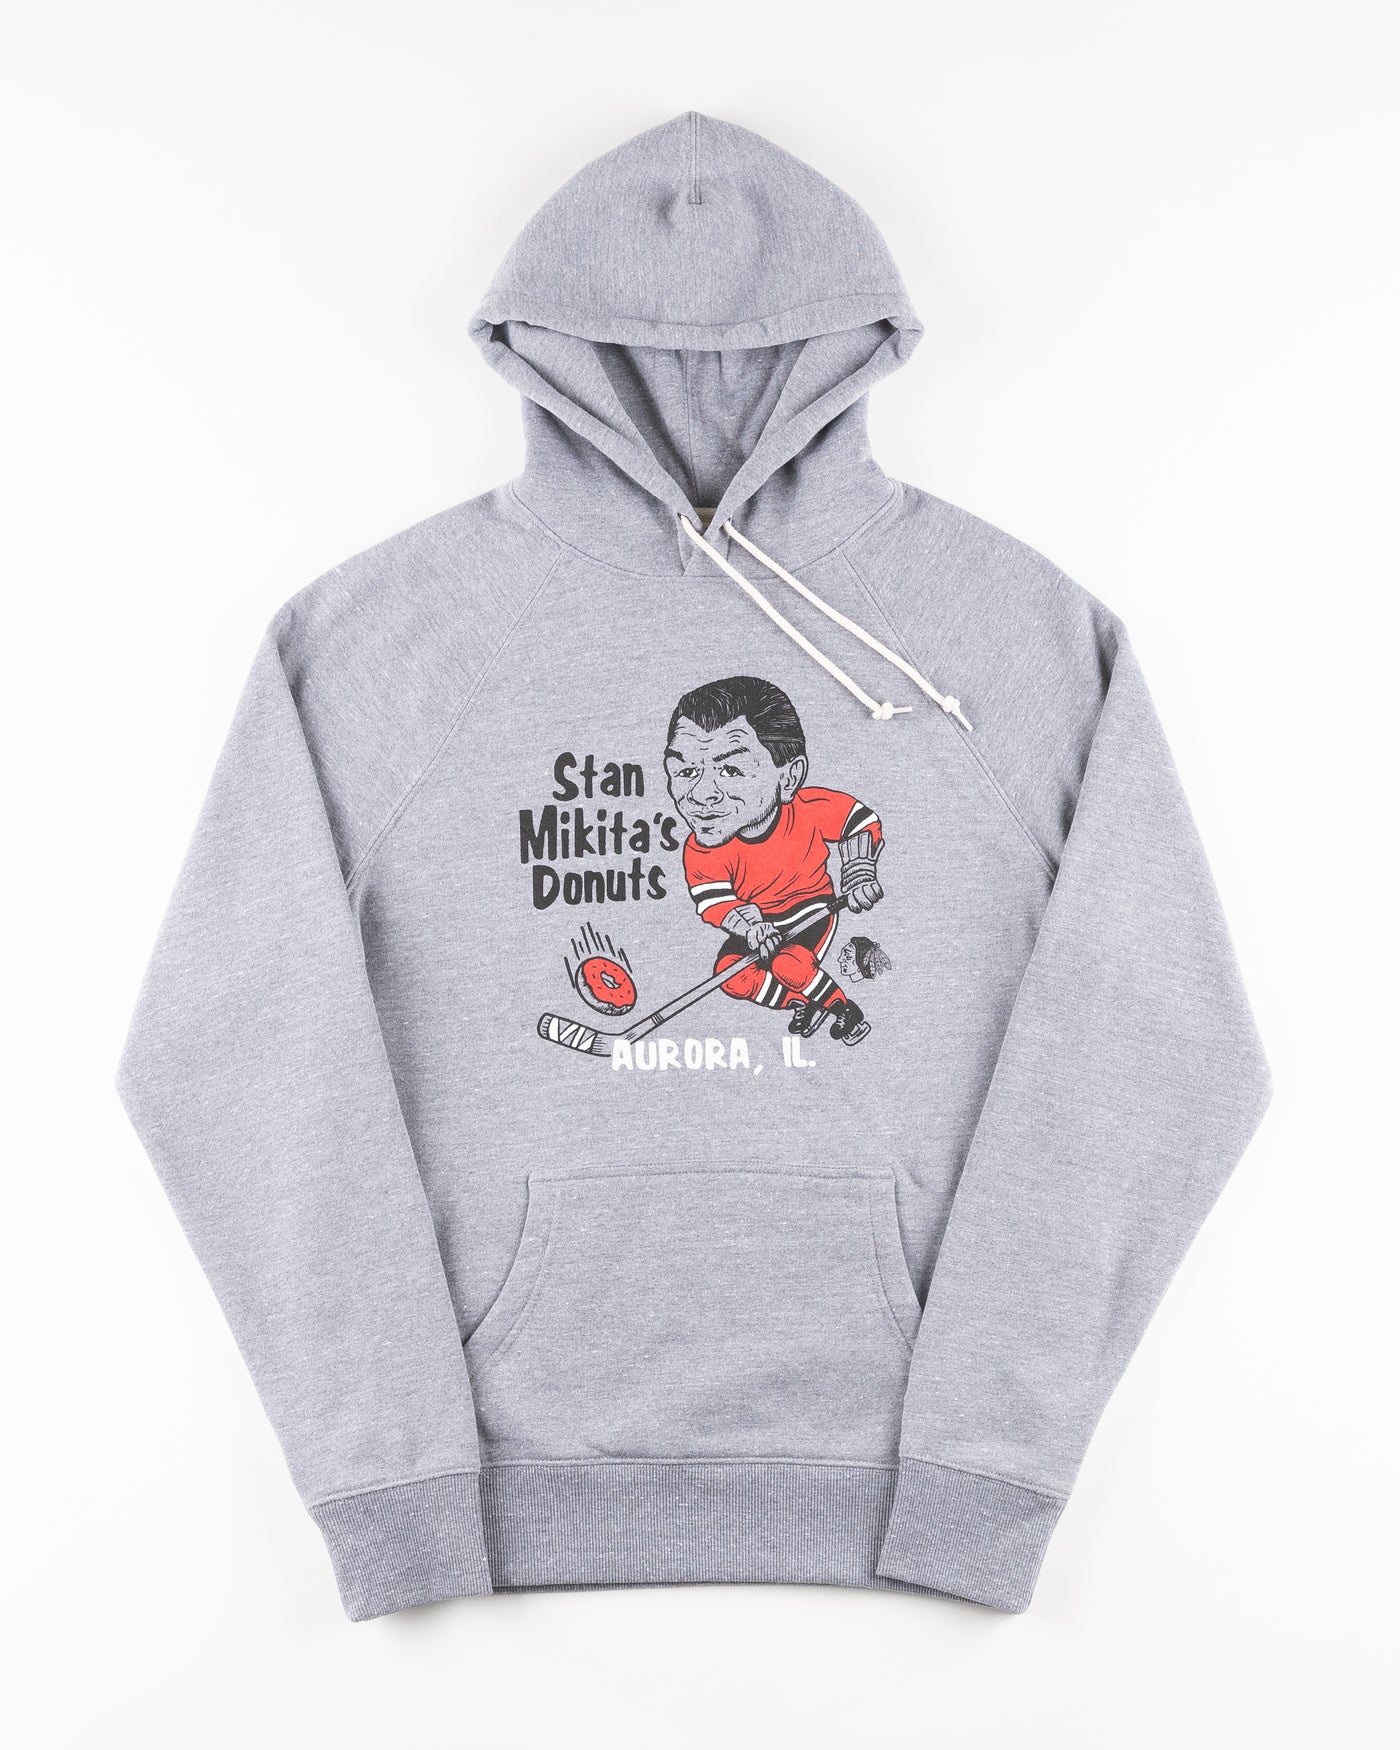 heather grey Homage hoodie with Stan Mikita's Donuts graphic - front lay flat